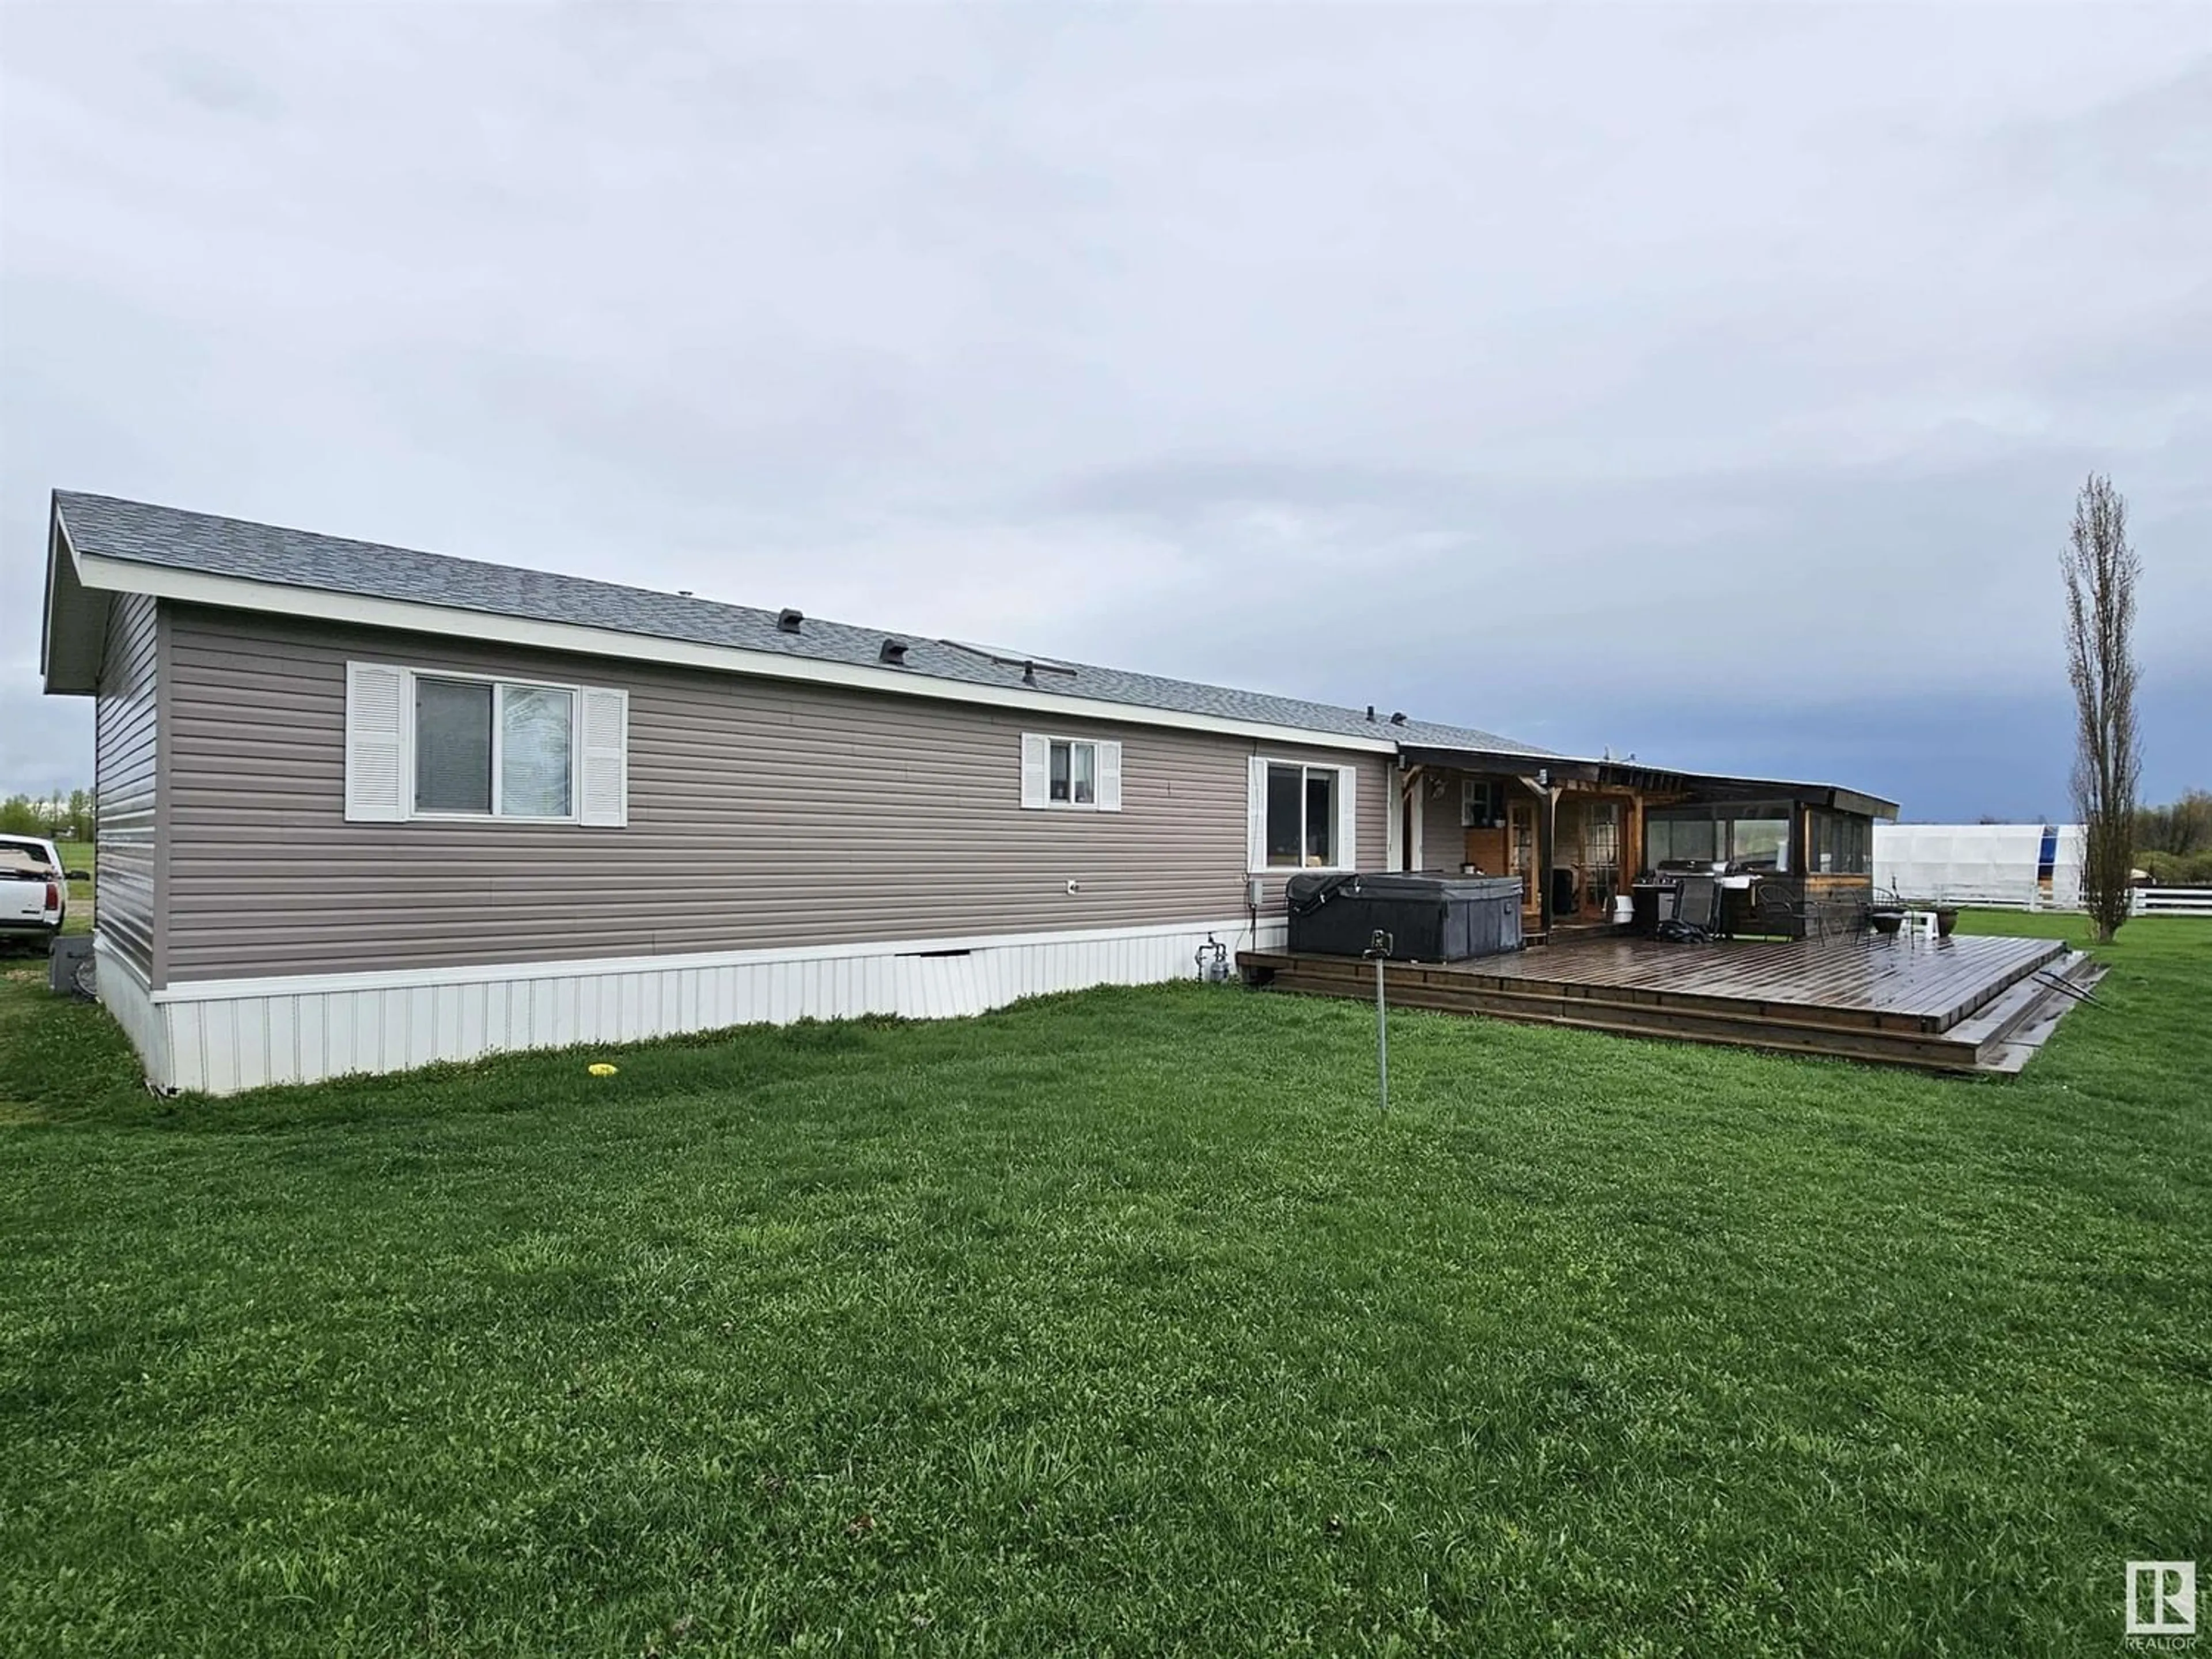 Home with vinyl exterior material for 48205 Hwy 22, Rural Brazeau County Alberta T0C0S0